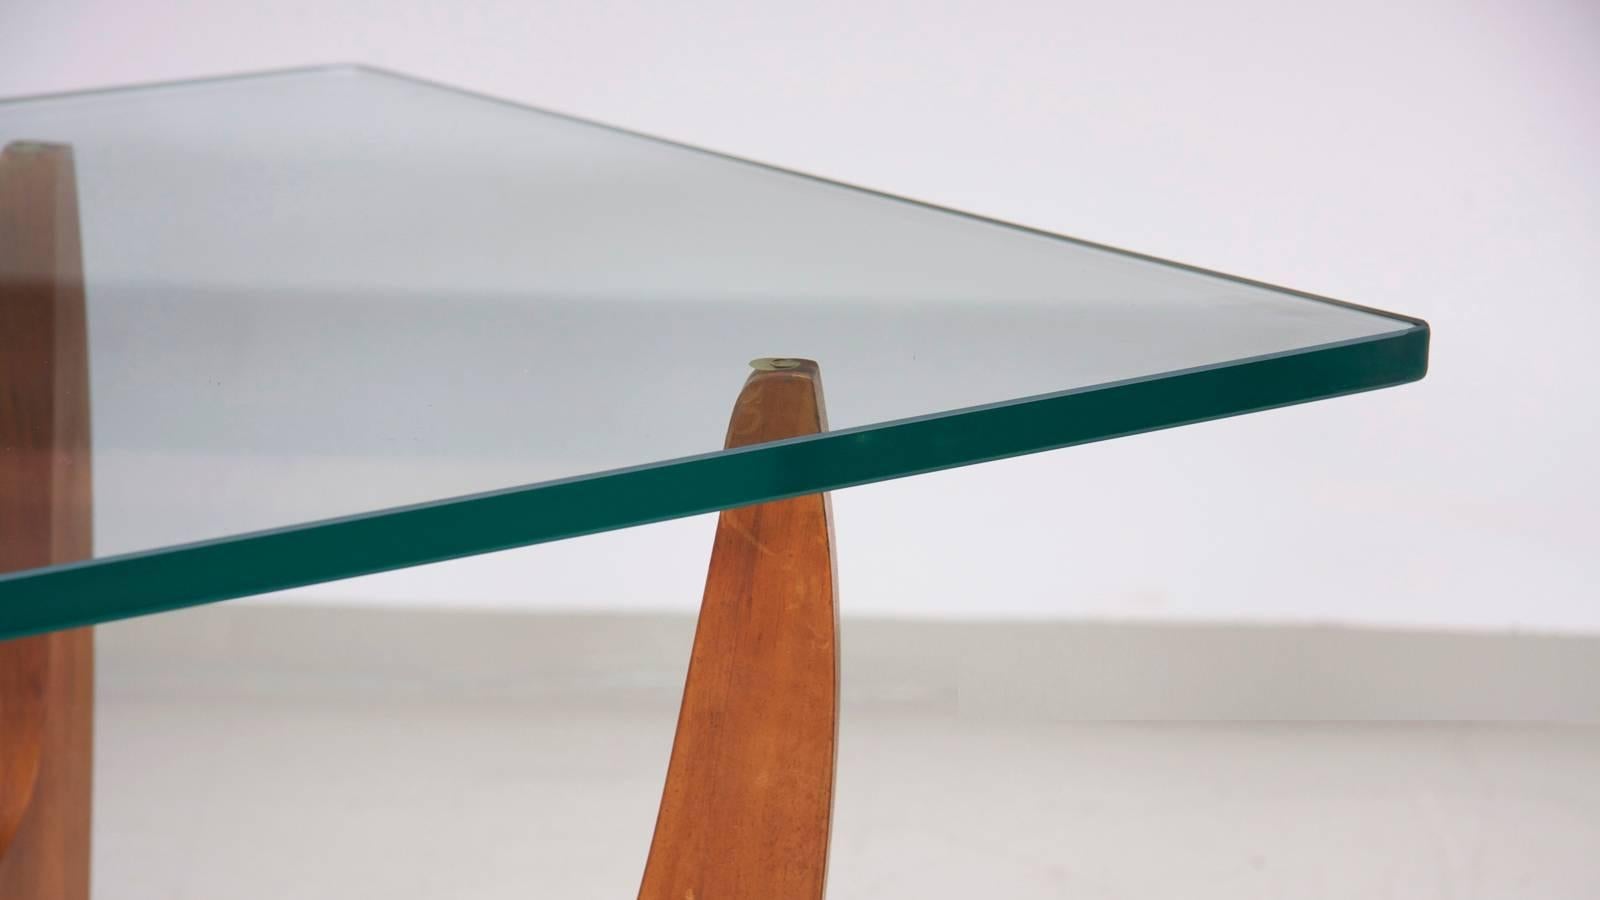 thick glass top coffee table